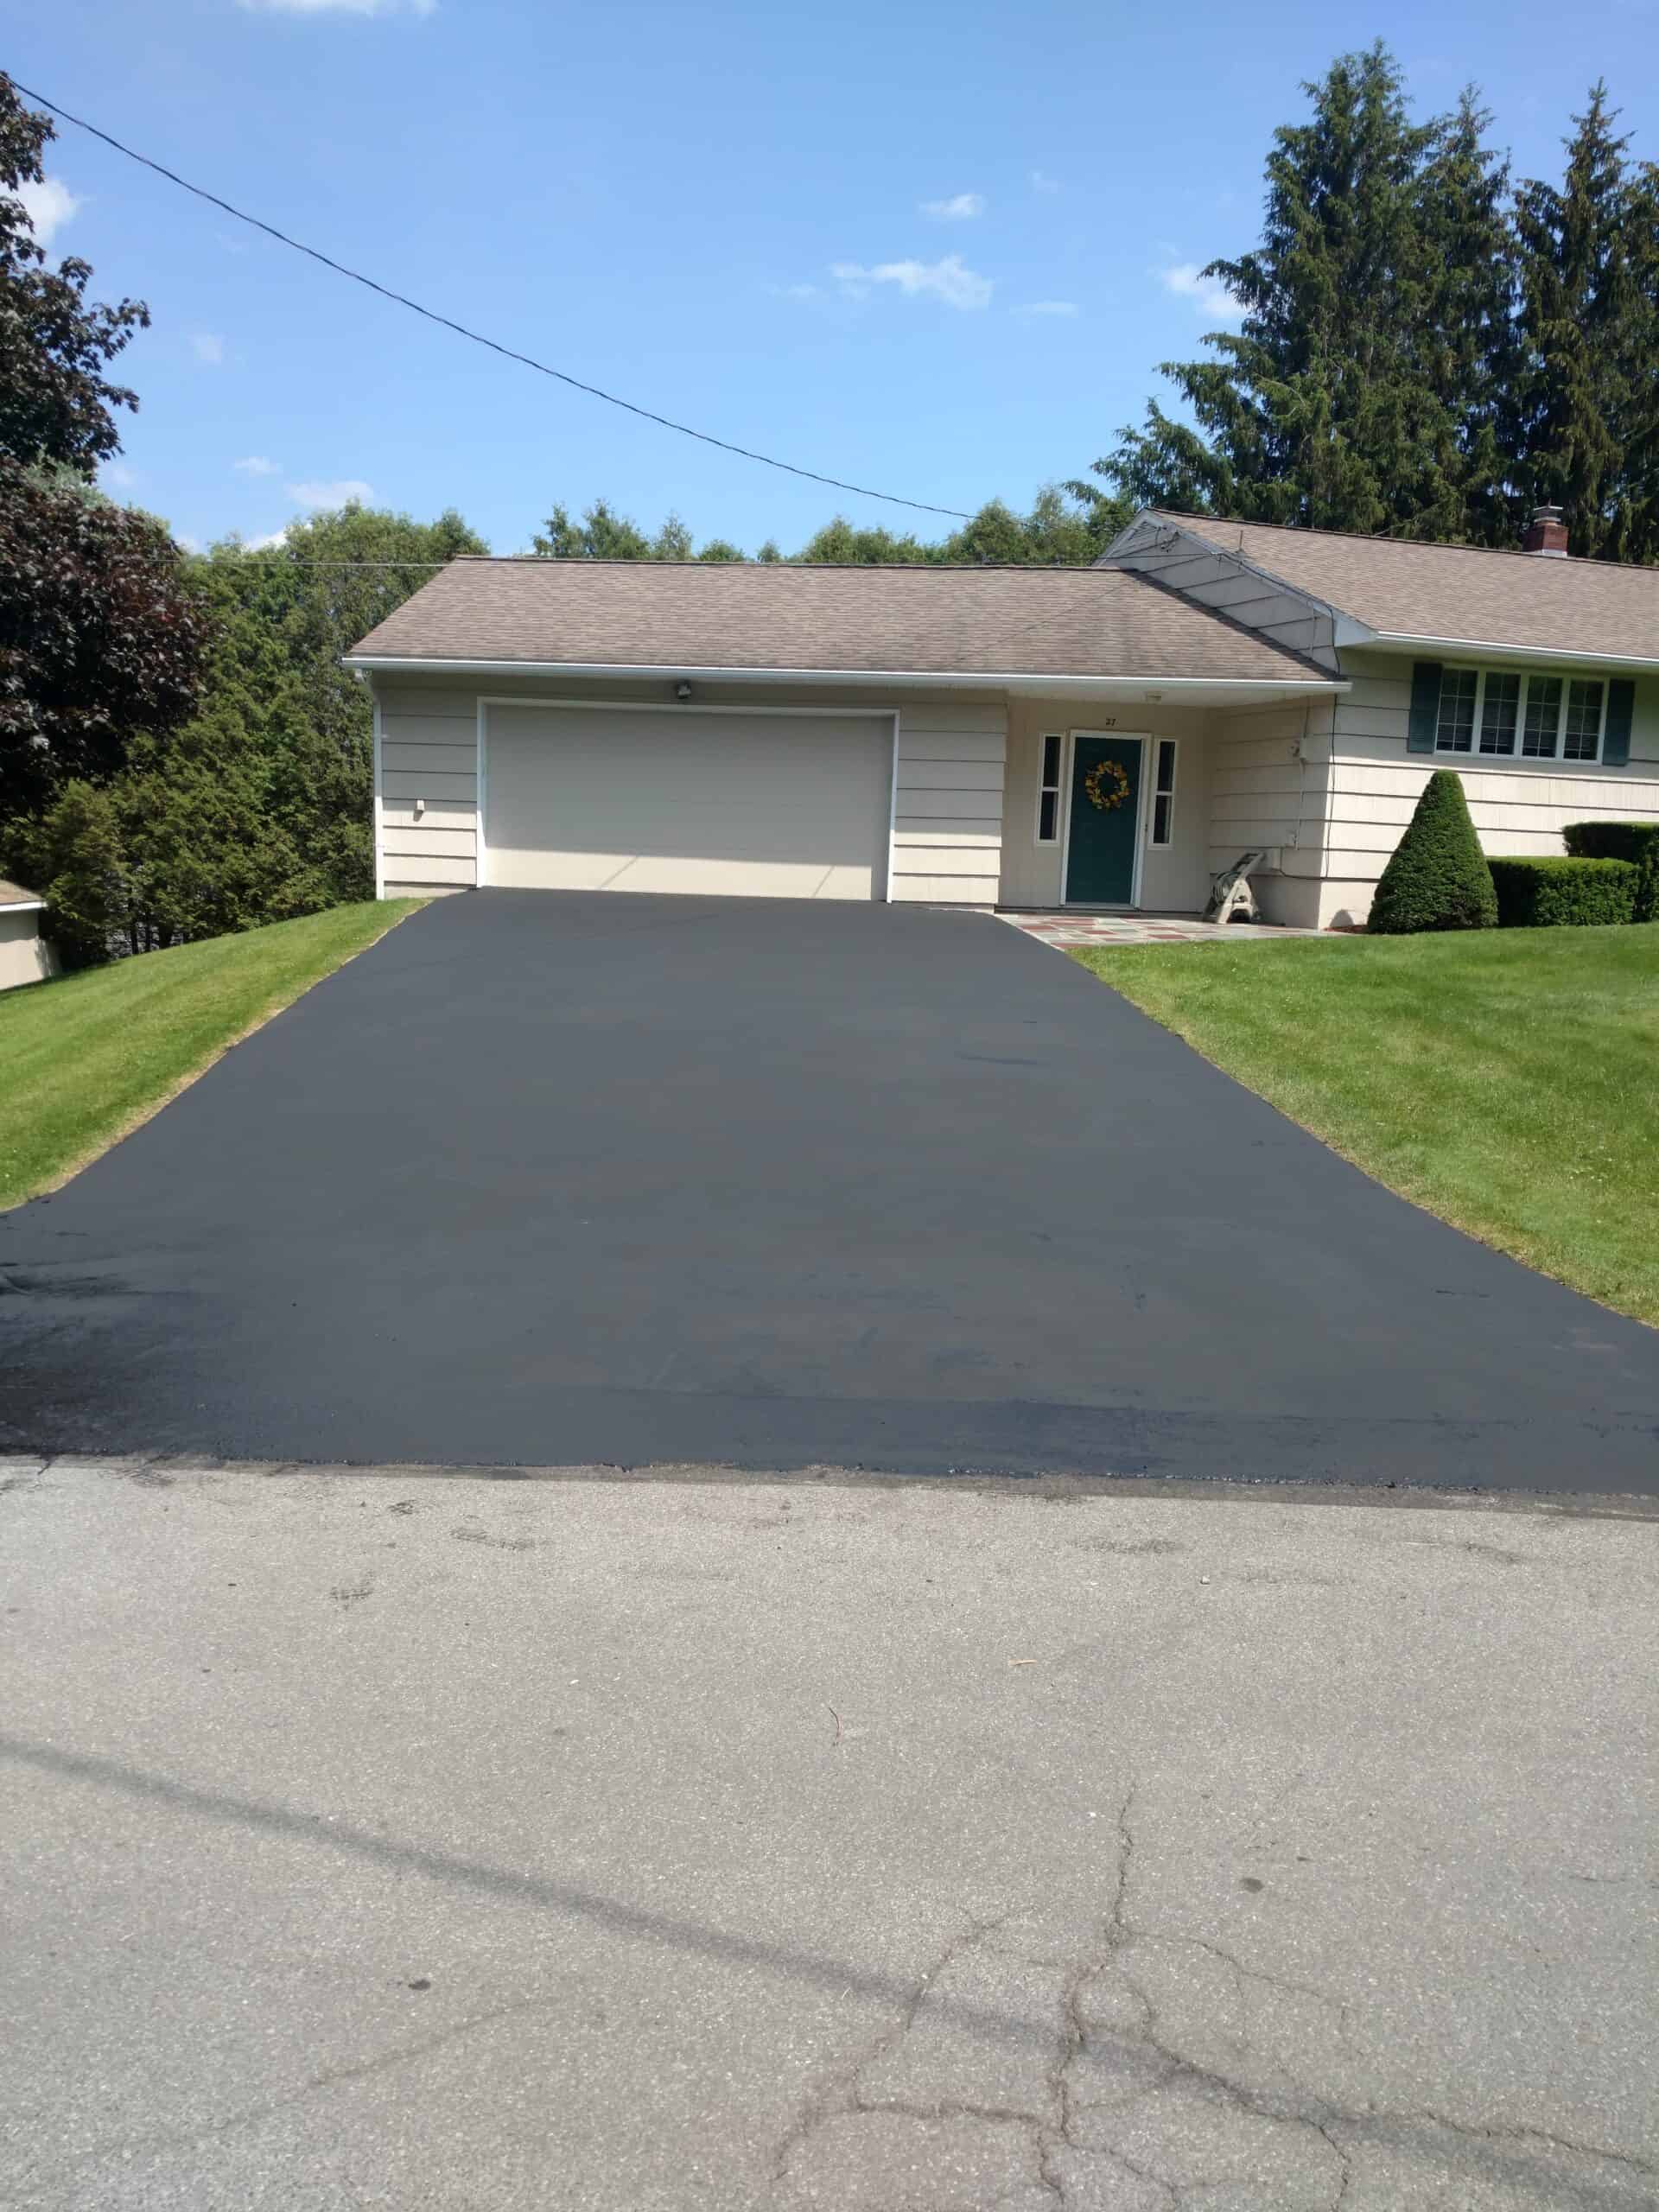 Asphalt sealcoating can add resistance and protection to your Westmoreland, New Hartford, or Clinton driveway! Call Newman Landscaping & Sealcoating today! 